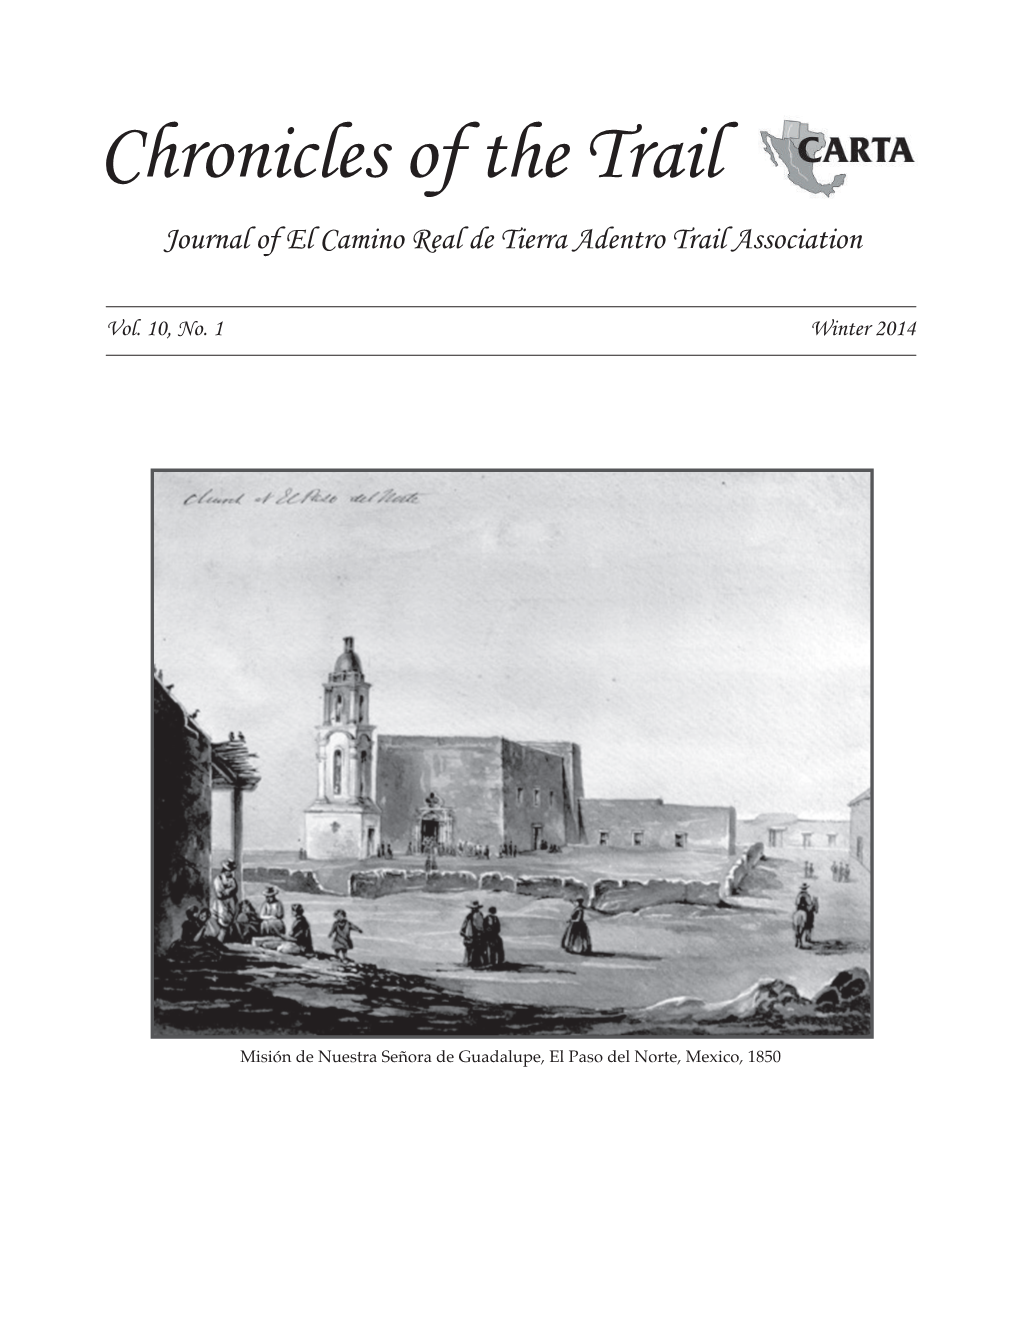 Chronicles of the Trail Journal of El Camino Real De Tierra Adentro Trail Association